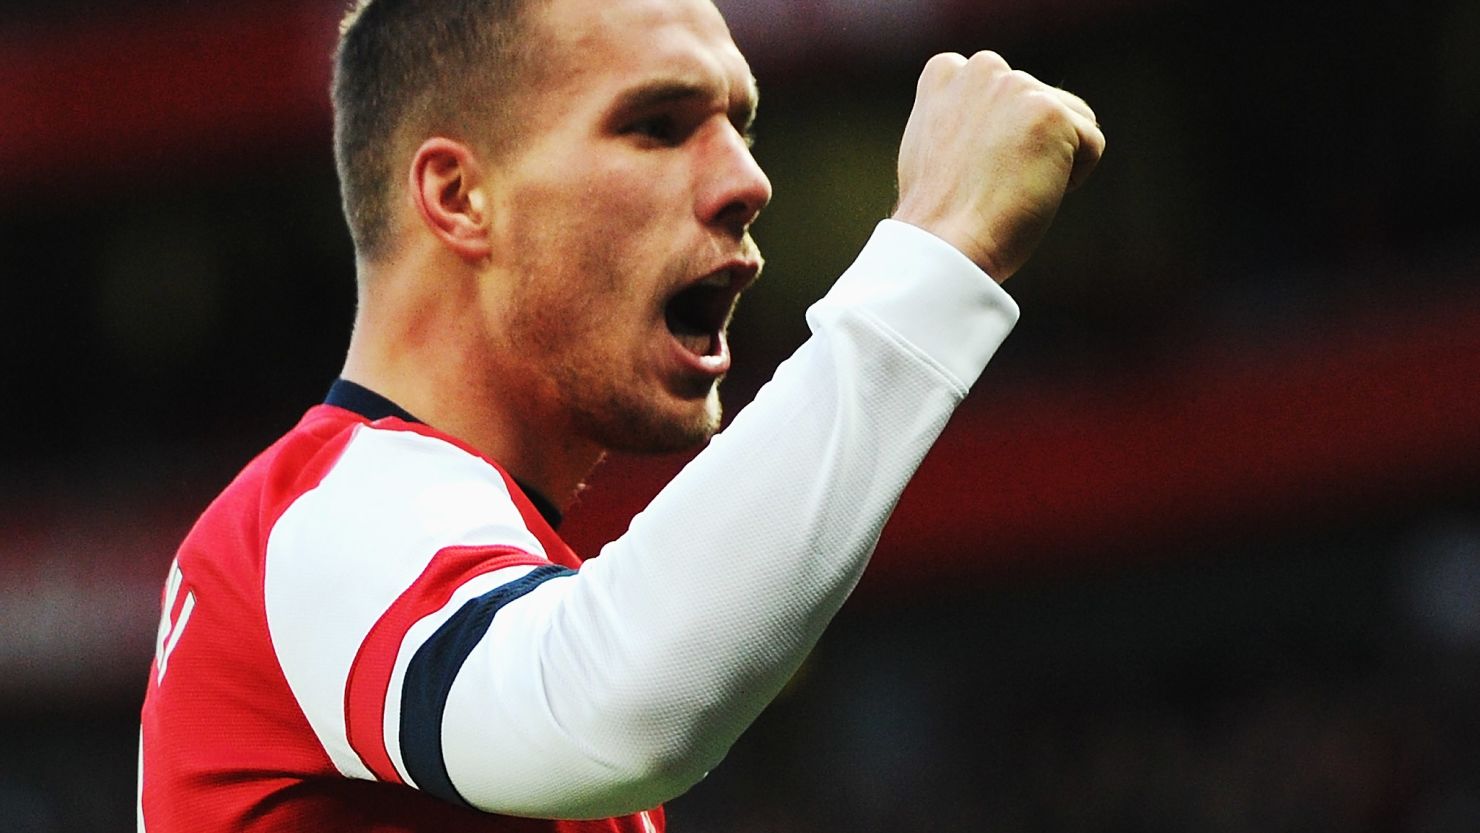 Lukas Podolski's second goal for Arsenal proved decisive in a 2-1 FA Cup win over Liverpool.